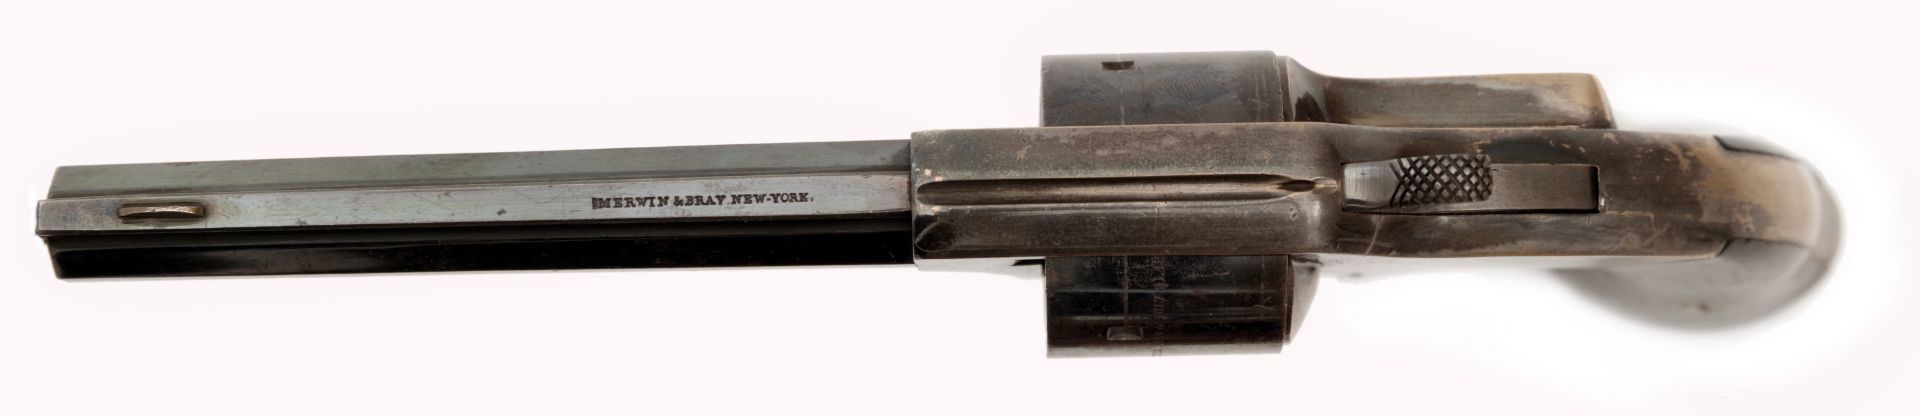 A Merwin & Bray, Plants Patent, 3rd Model Army Front Loading Revolver - Image 4 of 4